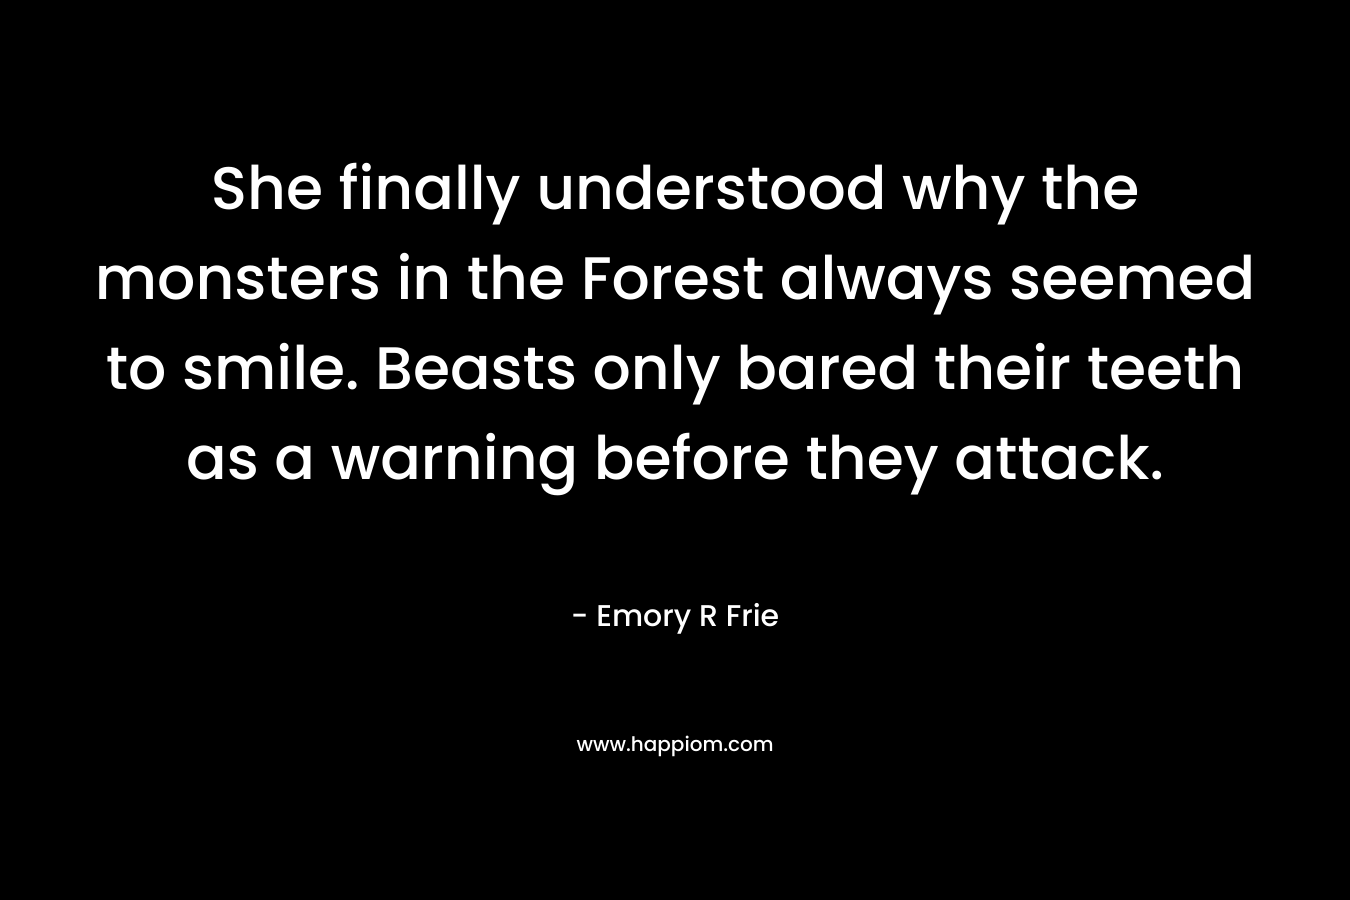 She finally understood why the monsters in the Forest always seemed to smile. Beasts only bared their teeth as a warning before they attack. – Emory R Frie